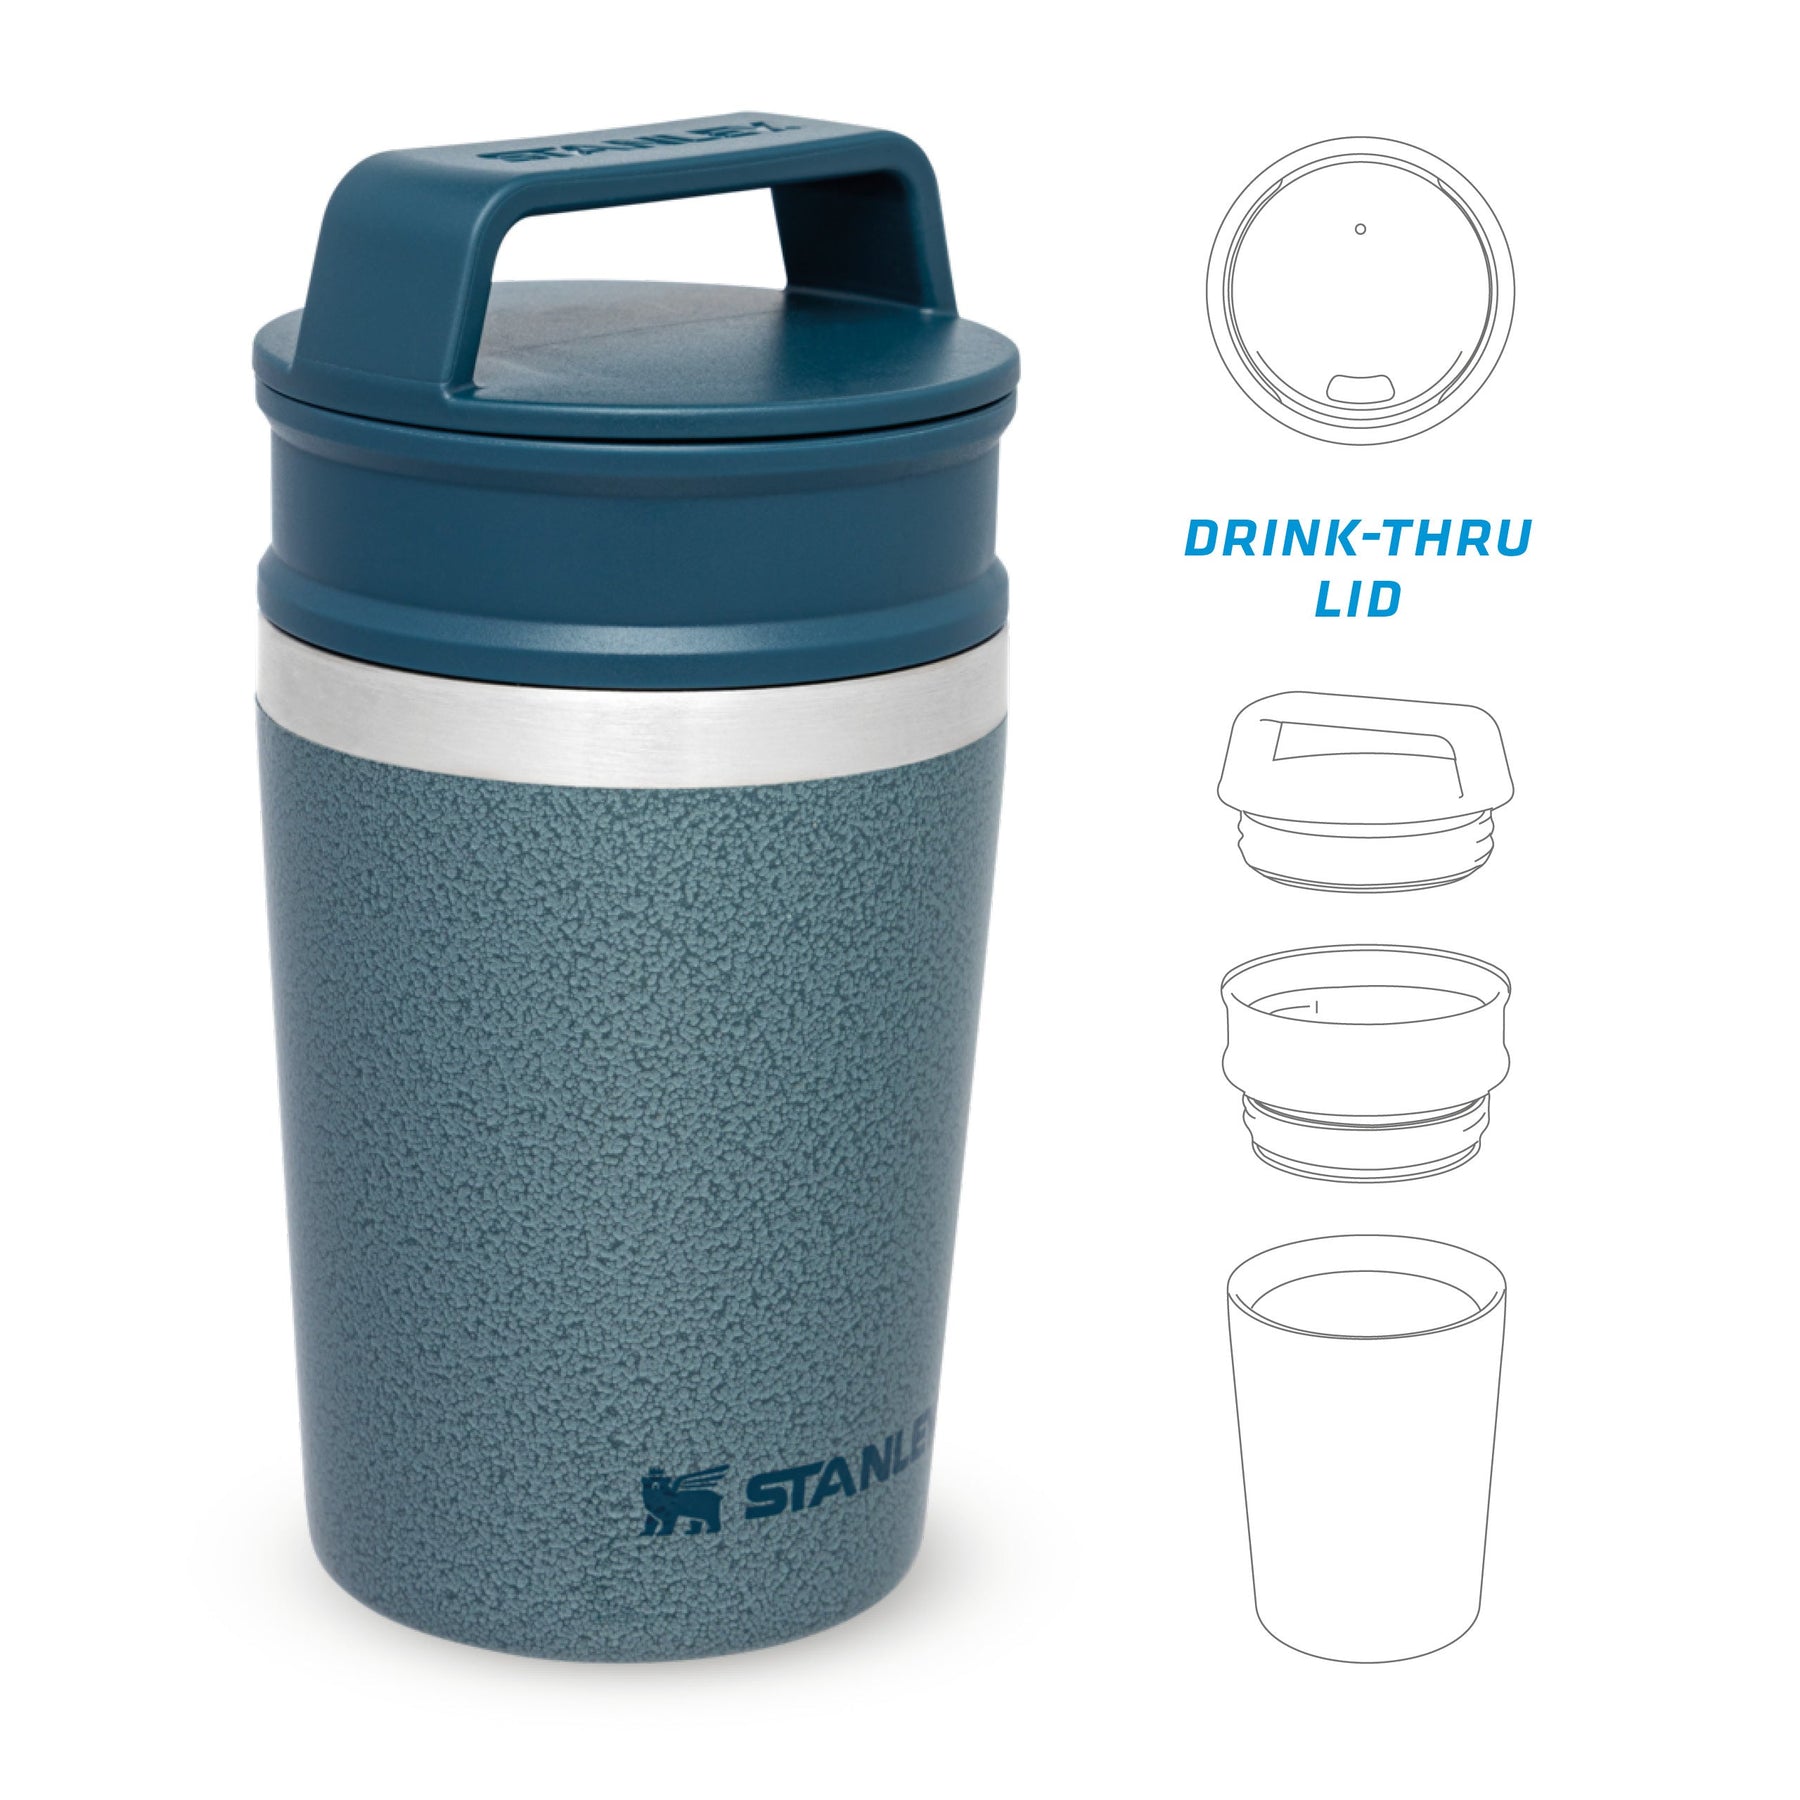  STANLEY Trigger Action Travel Mug 0.35L - Keeps Hot for 5 Hours  - BPA-Free - Thermos Flask for Hot or Cold Drinks - Leakproof Reusable  Coffee Cup - Dishwasher Safe 